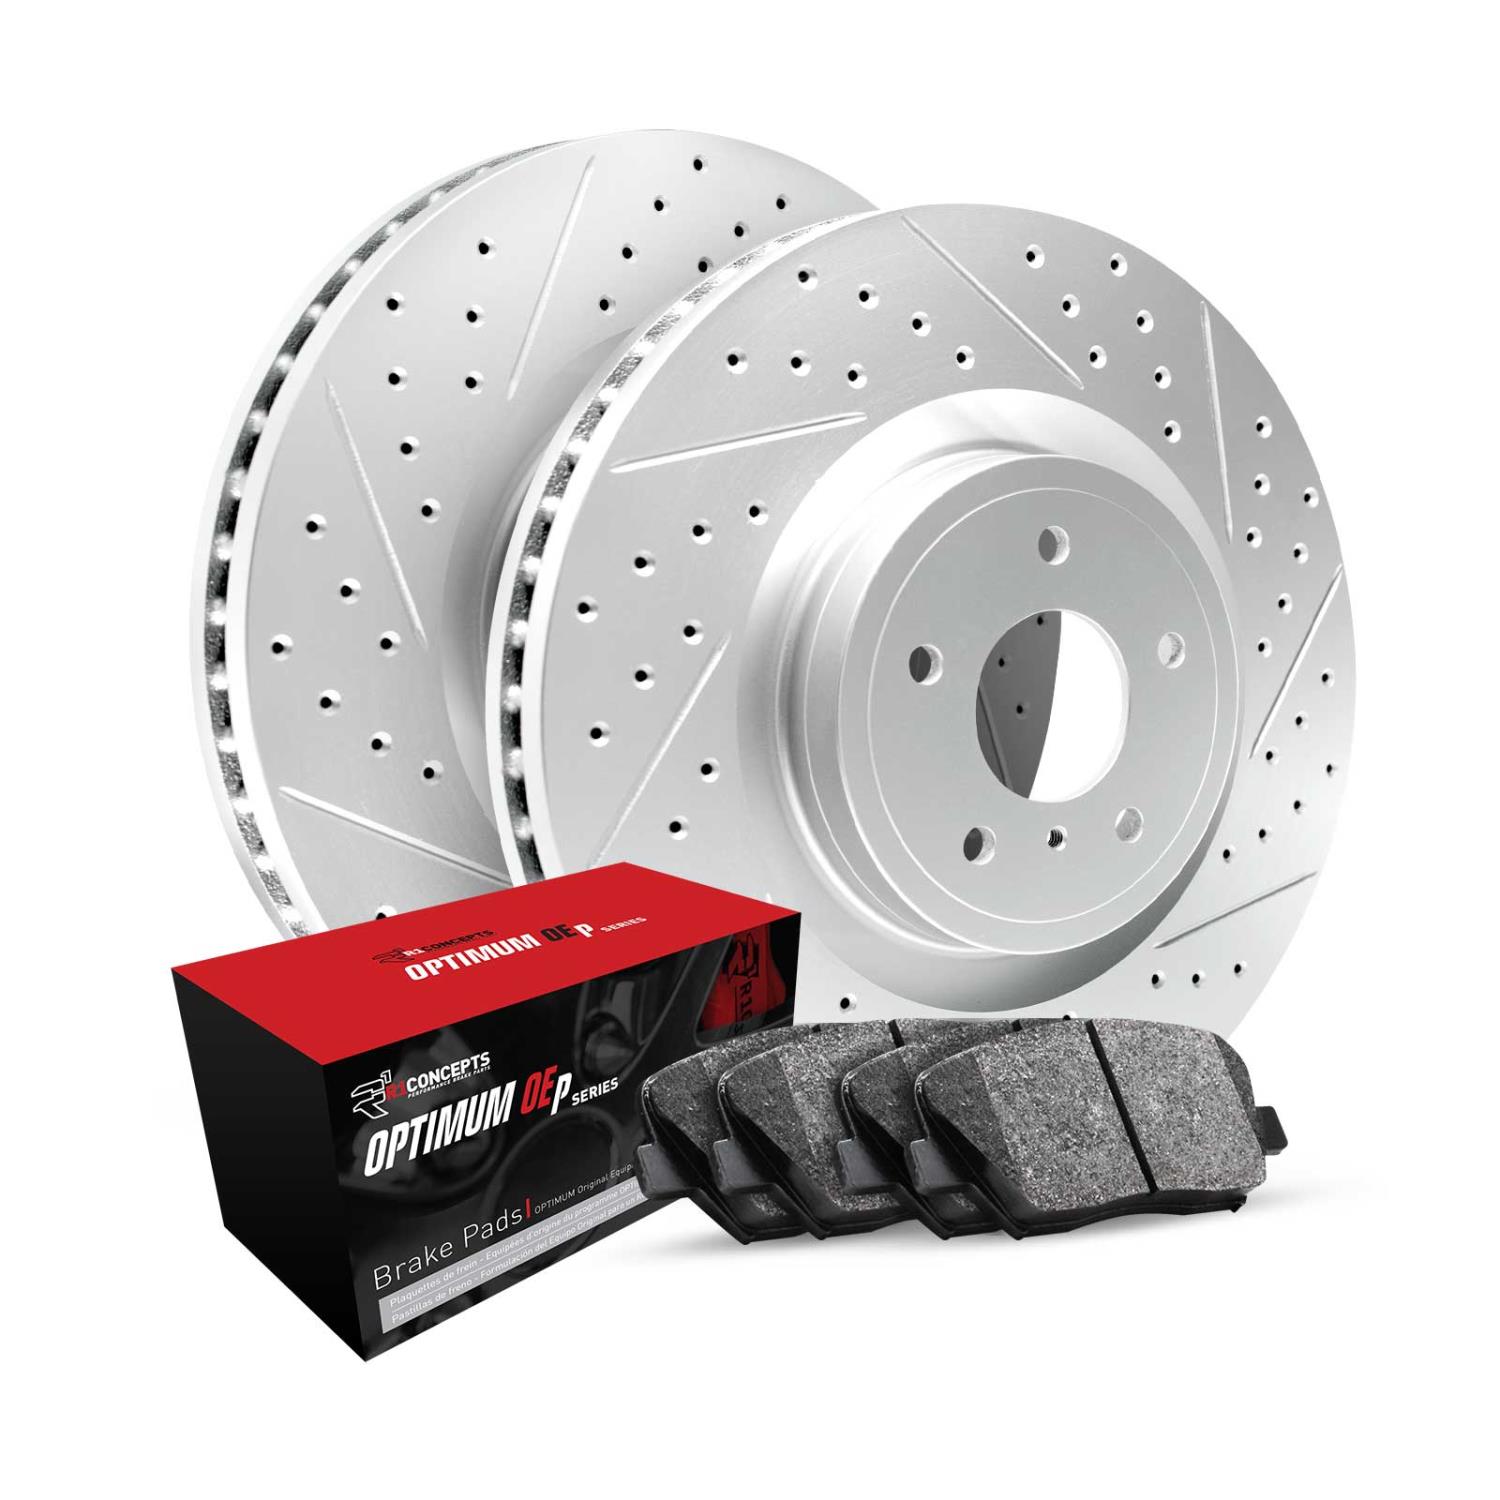 GEO-Carbon Drilled & Slotted Brake Rotor Set w/Optimum OE Pads, 2015-2019 Fits Multiple Makes/Models, Position: Rear